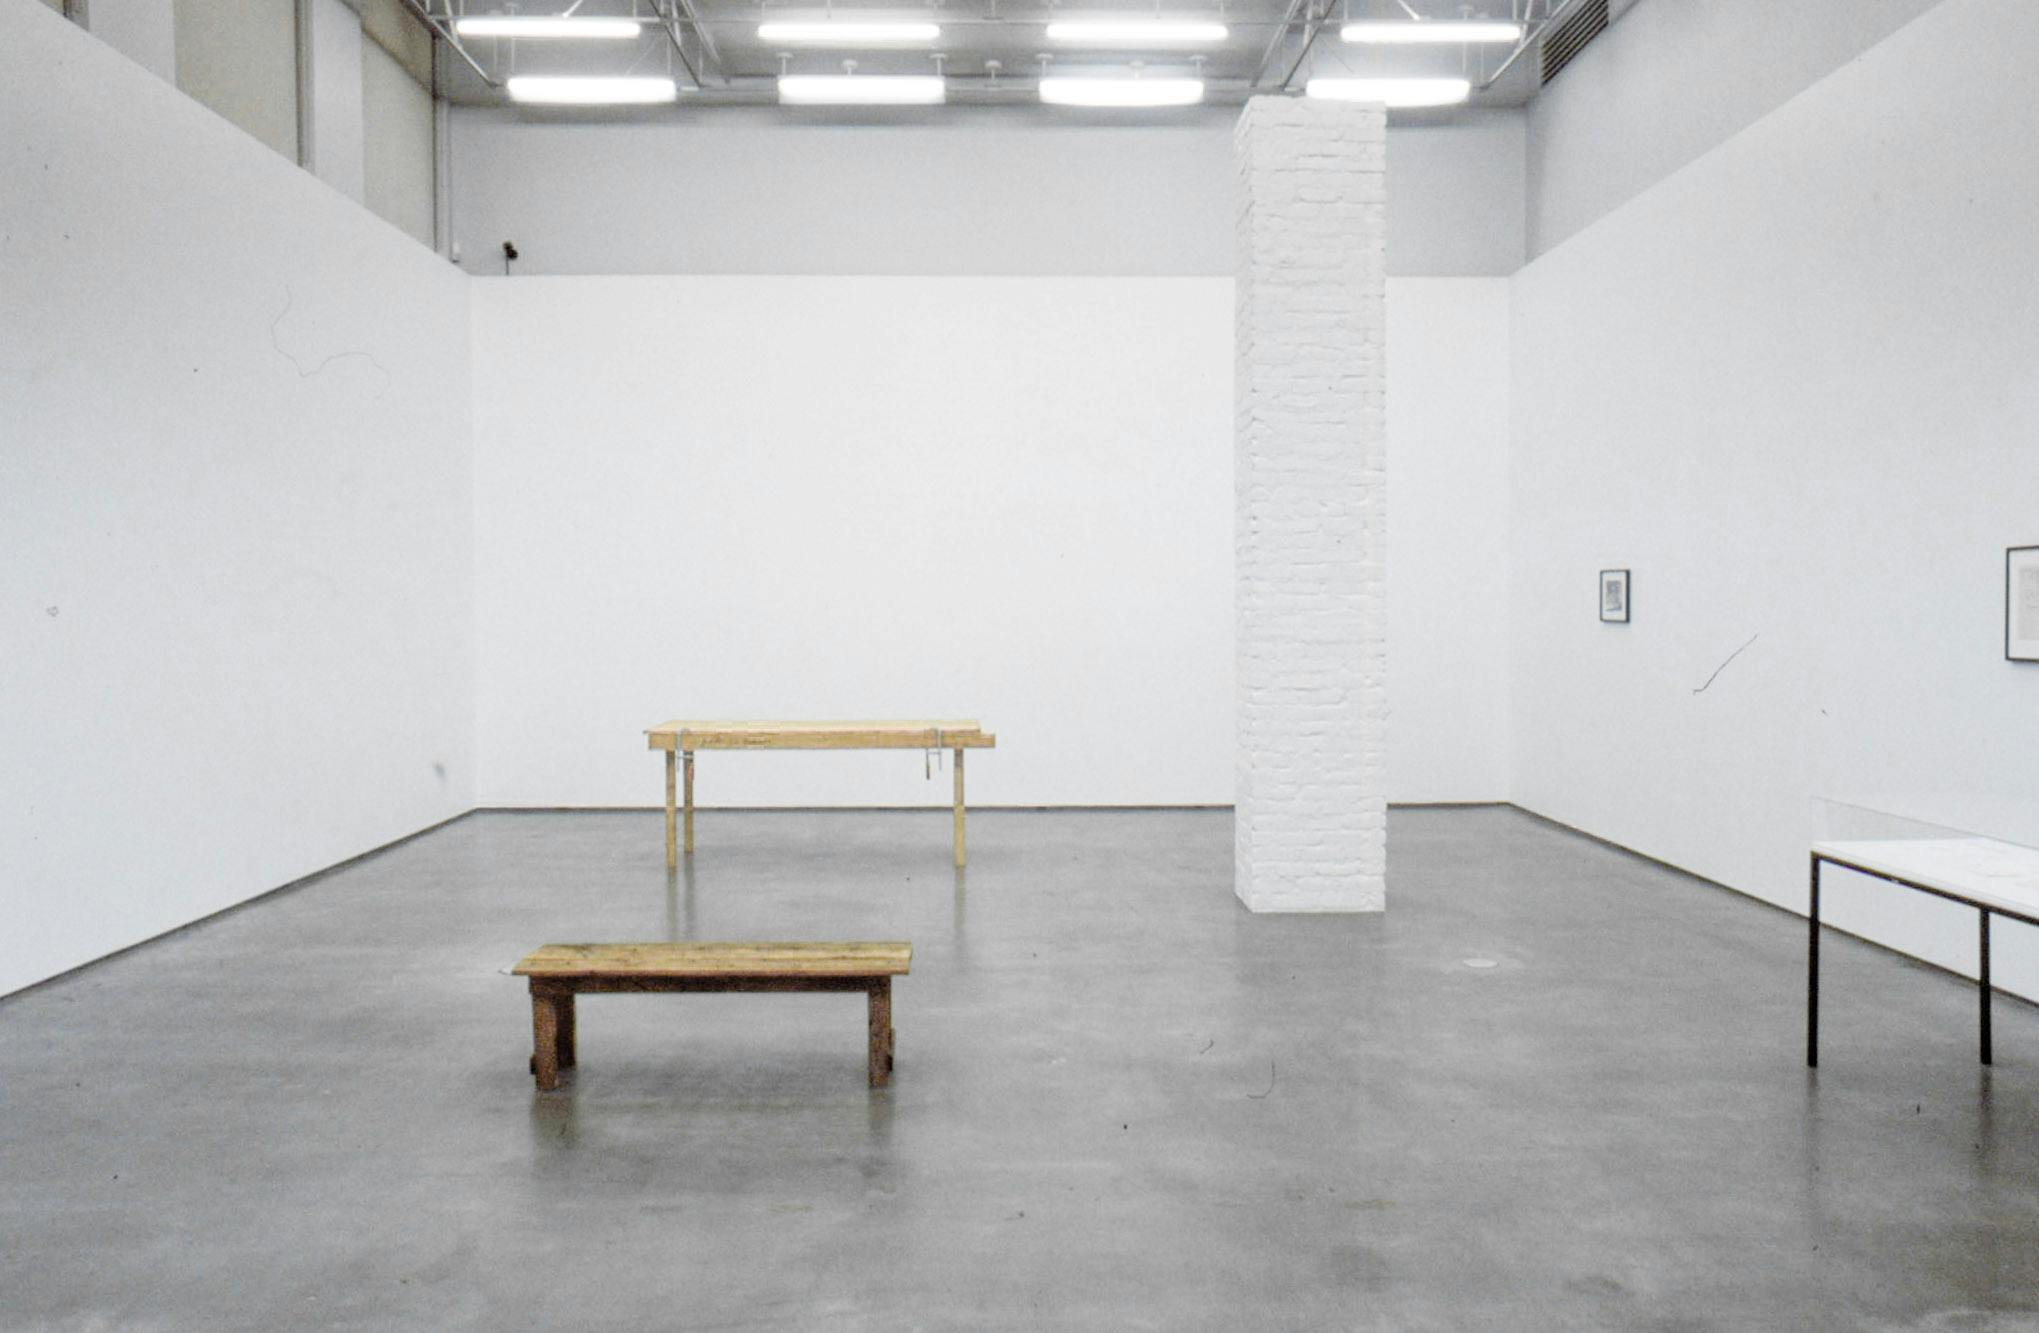 An installation image of Kirsten Pieroth’s art exhibition.  At least 7 meters tall white square pillar stands in a gallery. The pillar does not reach the gallery ceiling. A wood bench and a table are placed separately on the floor. 